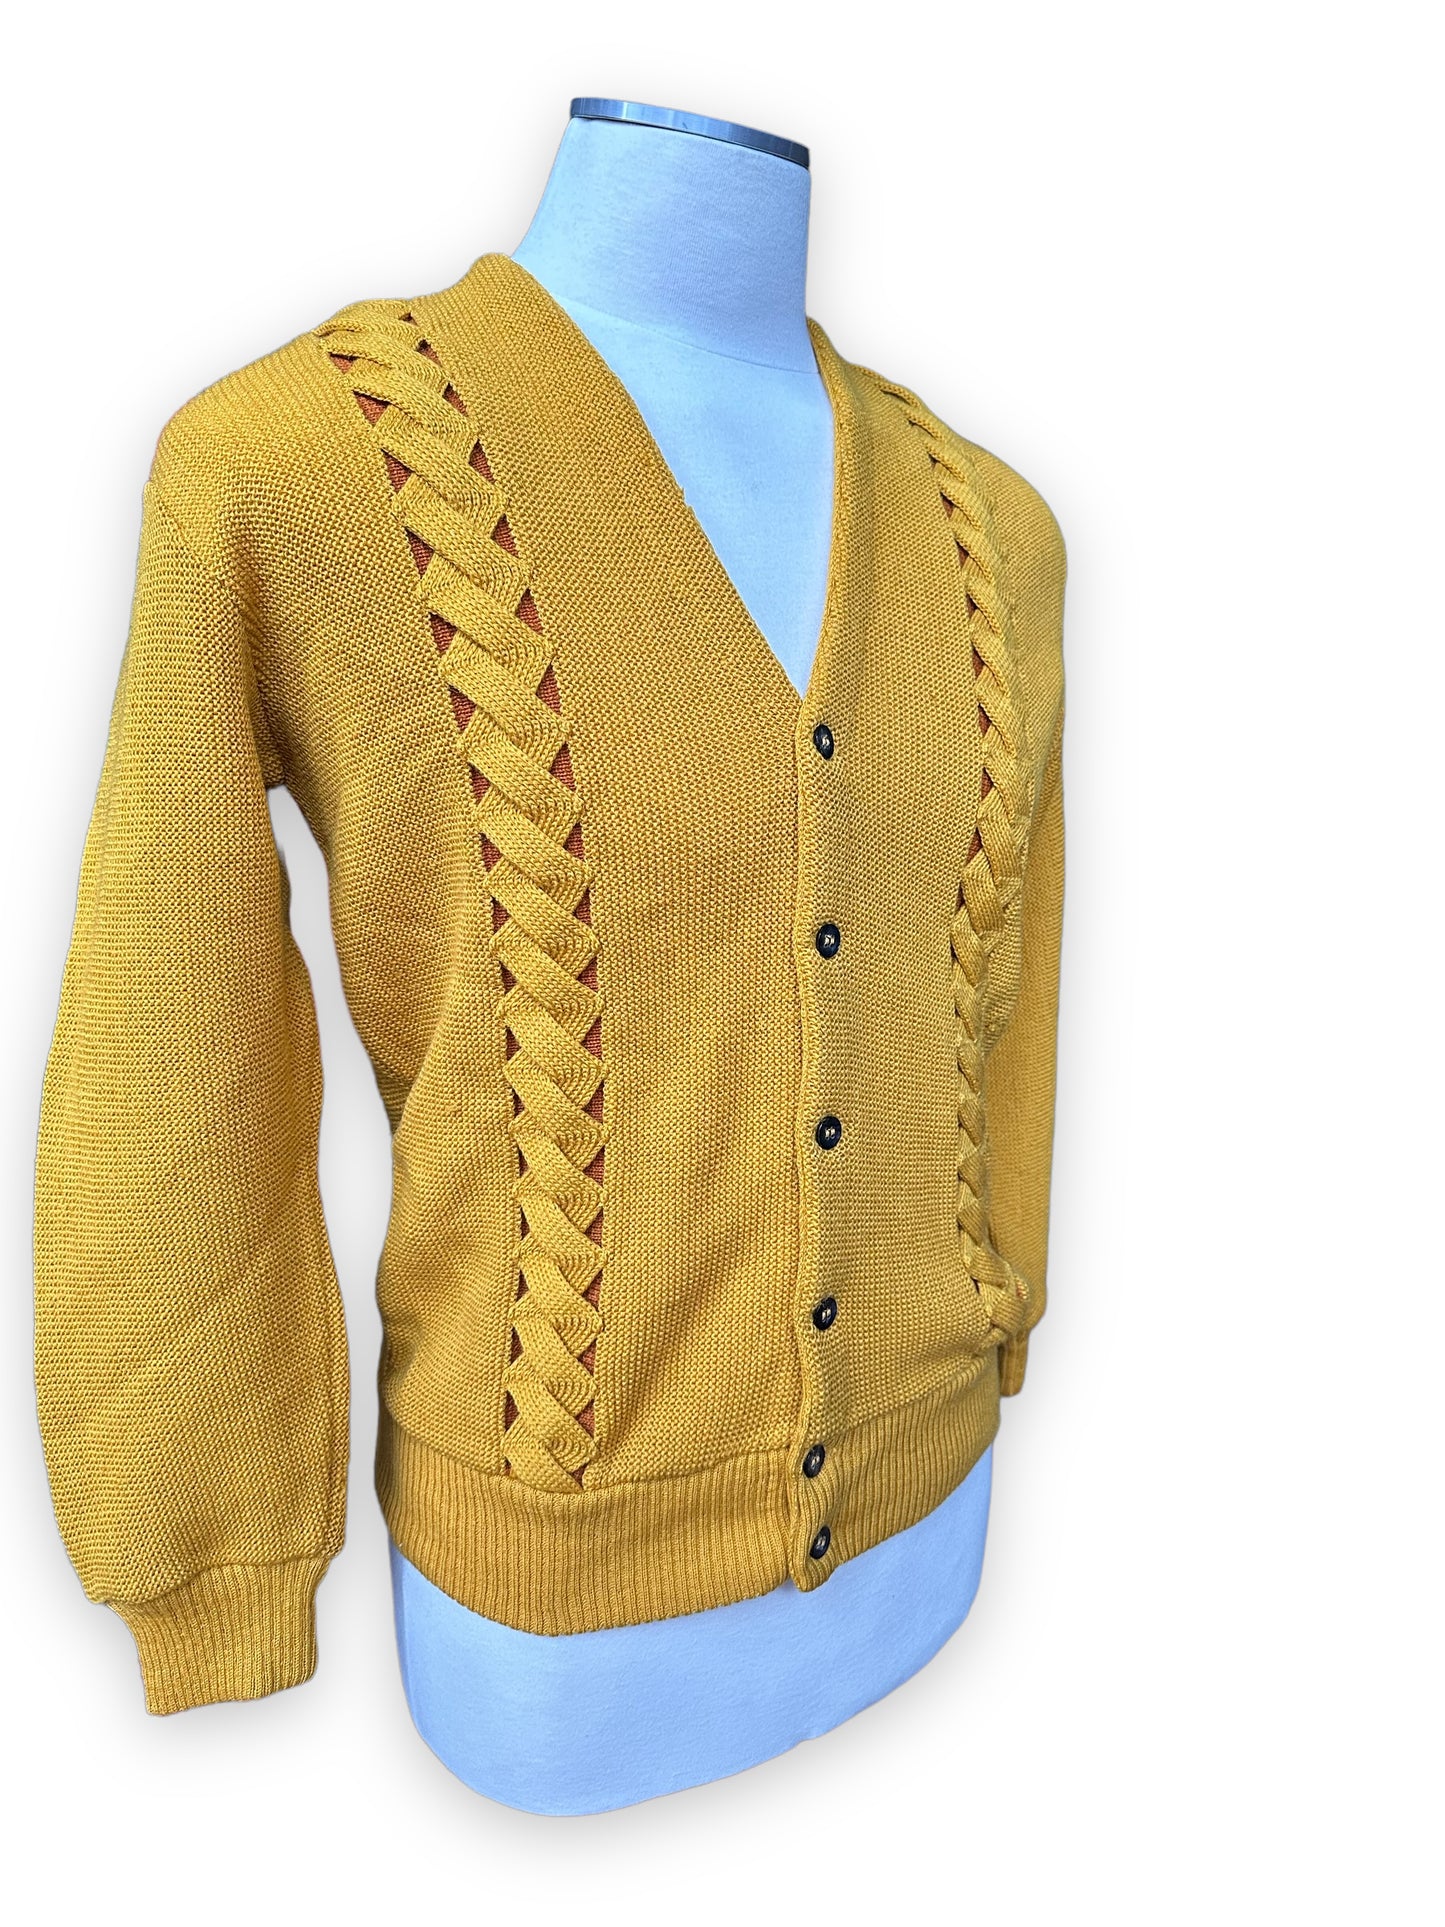 Right Front Quarter View of Vintage Seattle Knitting Mills Golden Double Helix Wool Sweater SZ M |  Vintage Cardigan Sweaters Seattle | Barn Owl Vintage Seattle